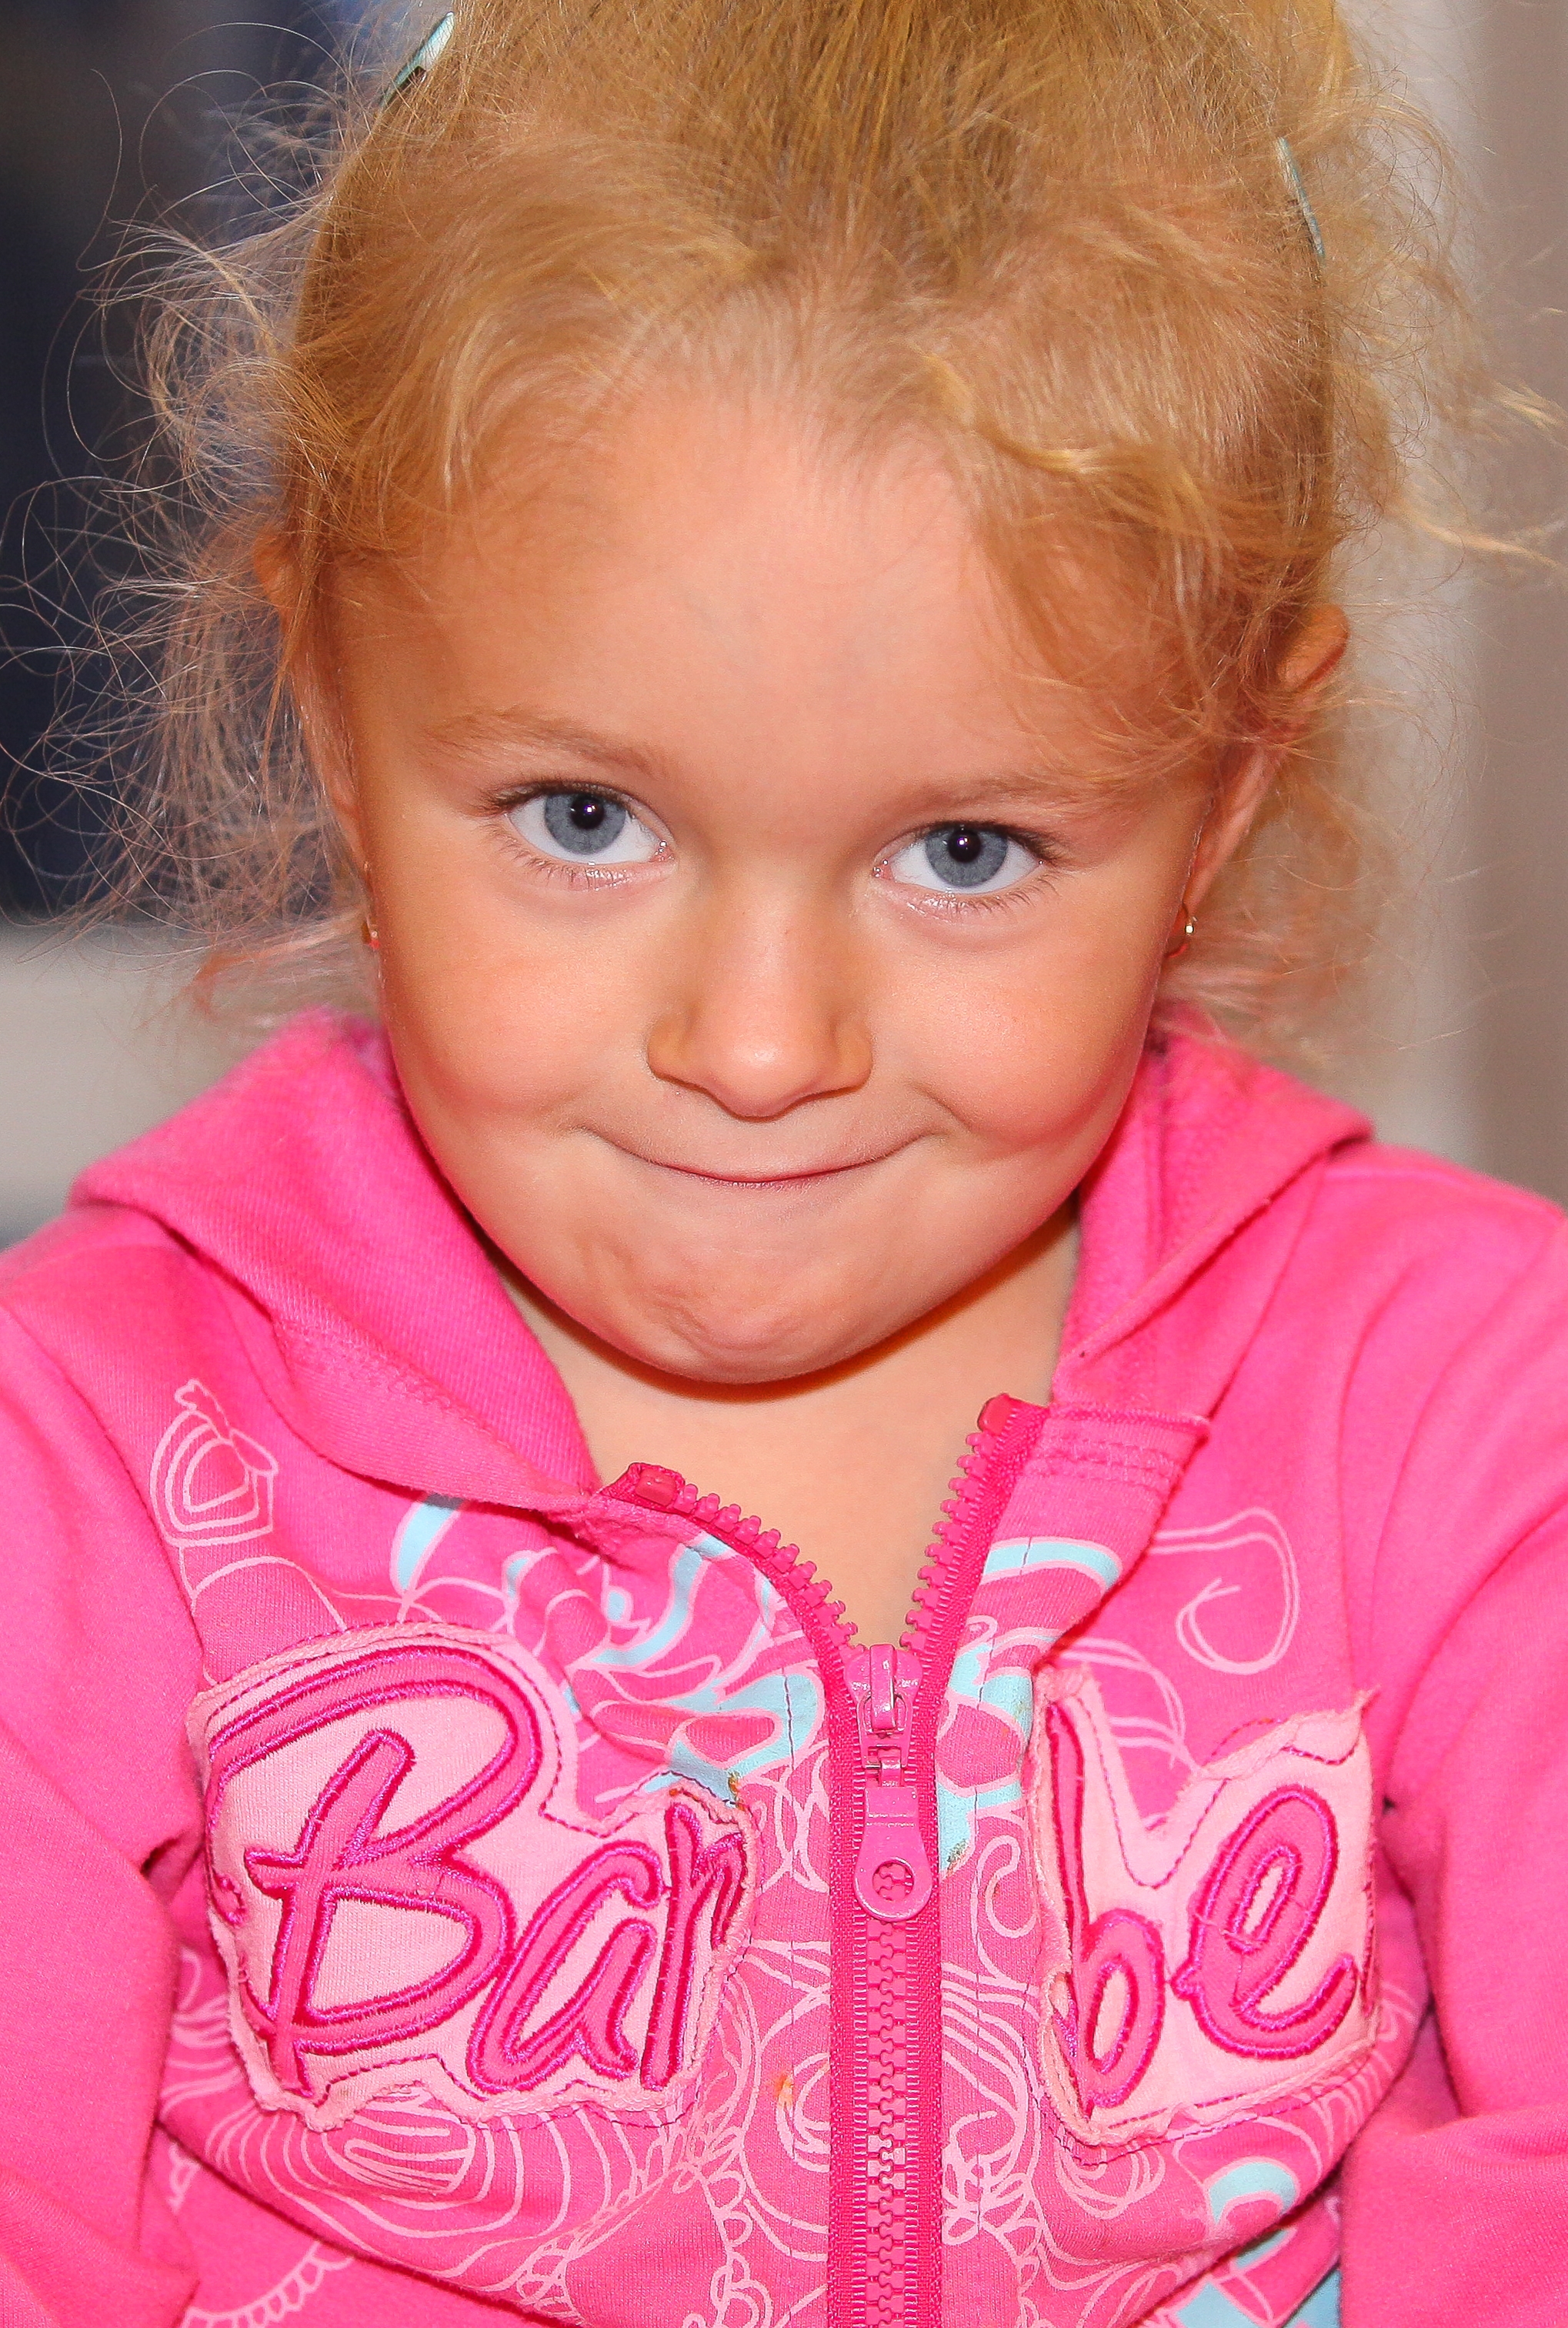 a sweet blond child girl photographed in September 2013, picture 2/4